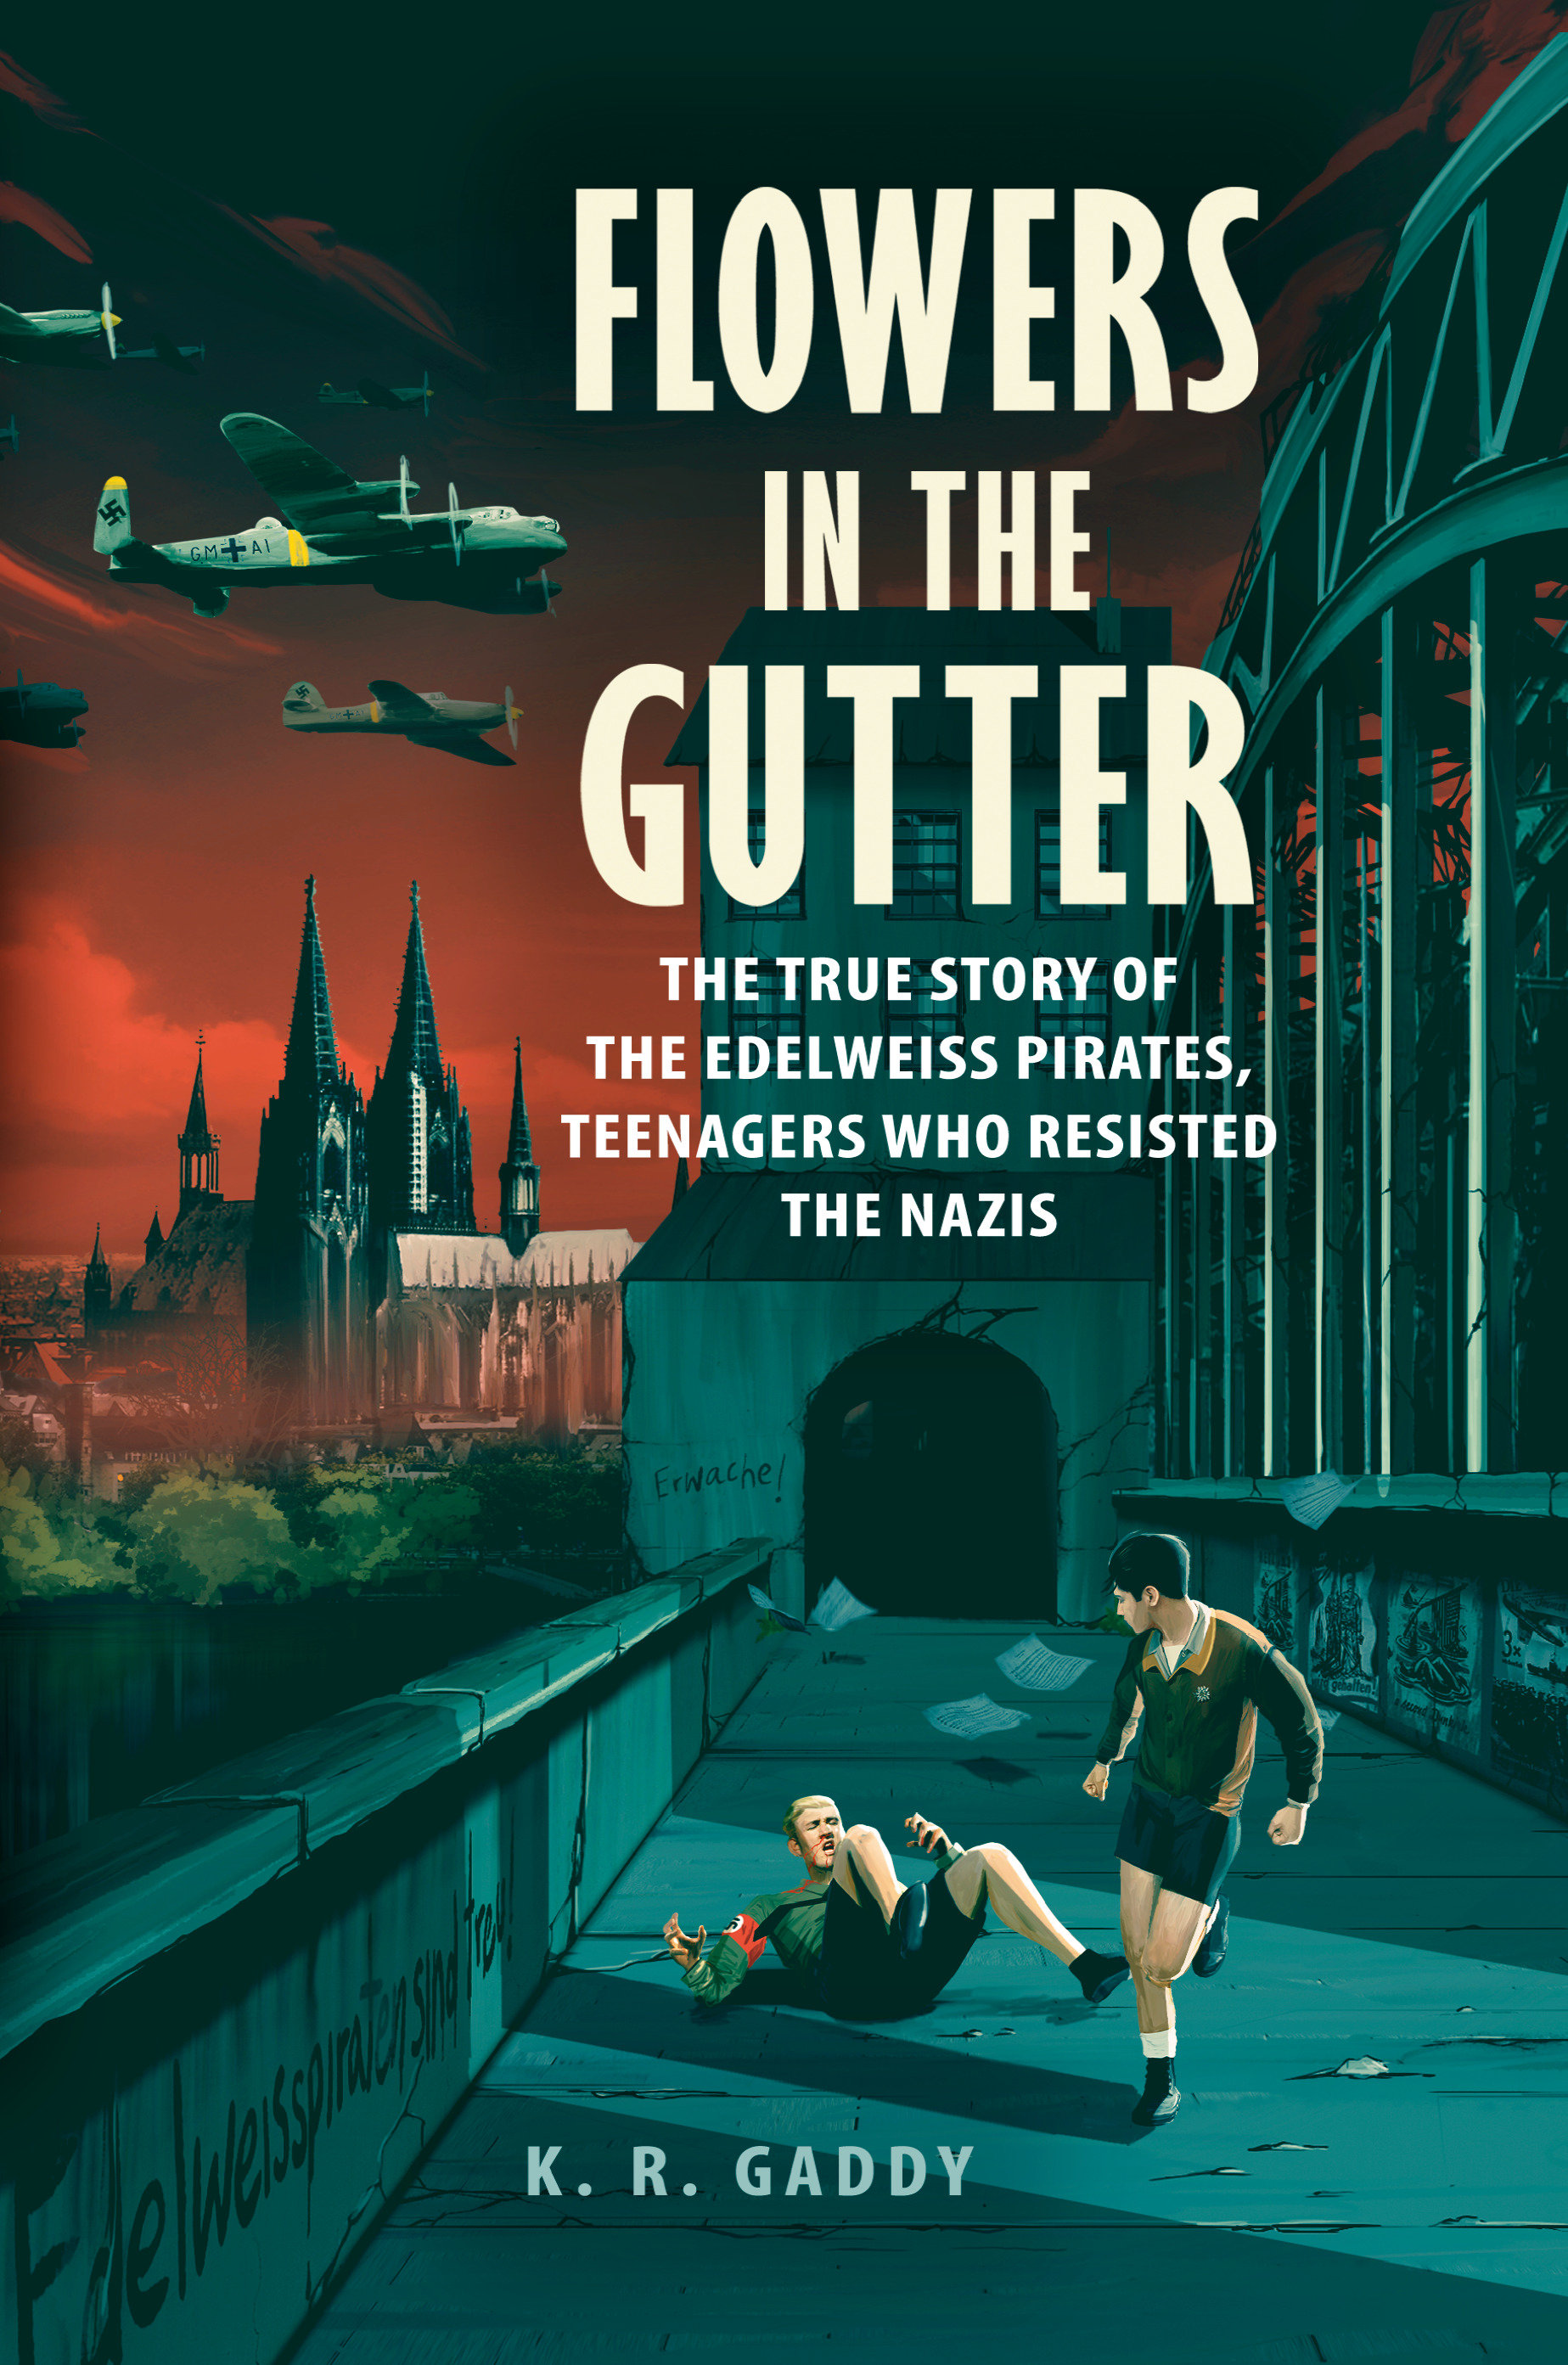 Flowers in the Gutter The True Story of the Edelweiss Pirates, Teenagers Who Resisted the Nazis cover image